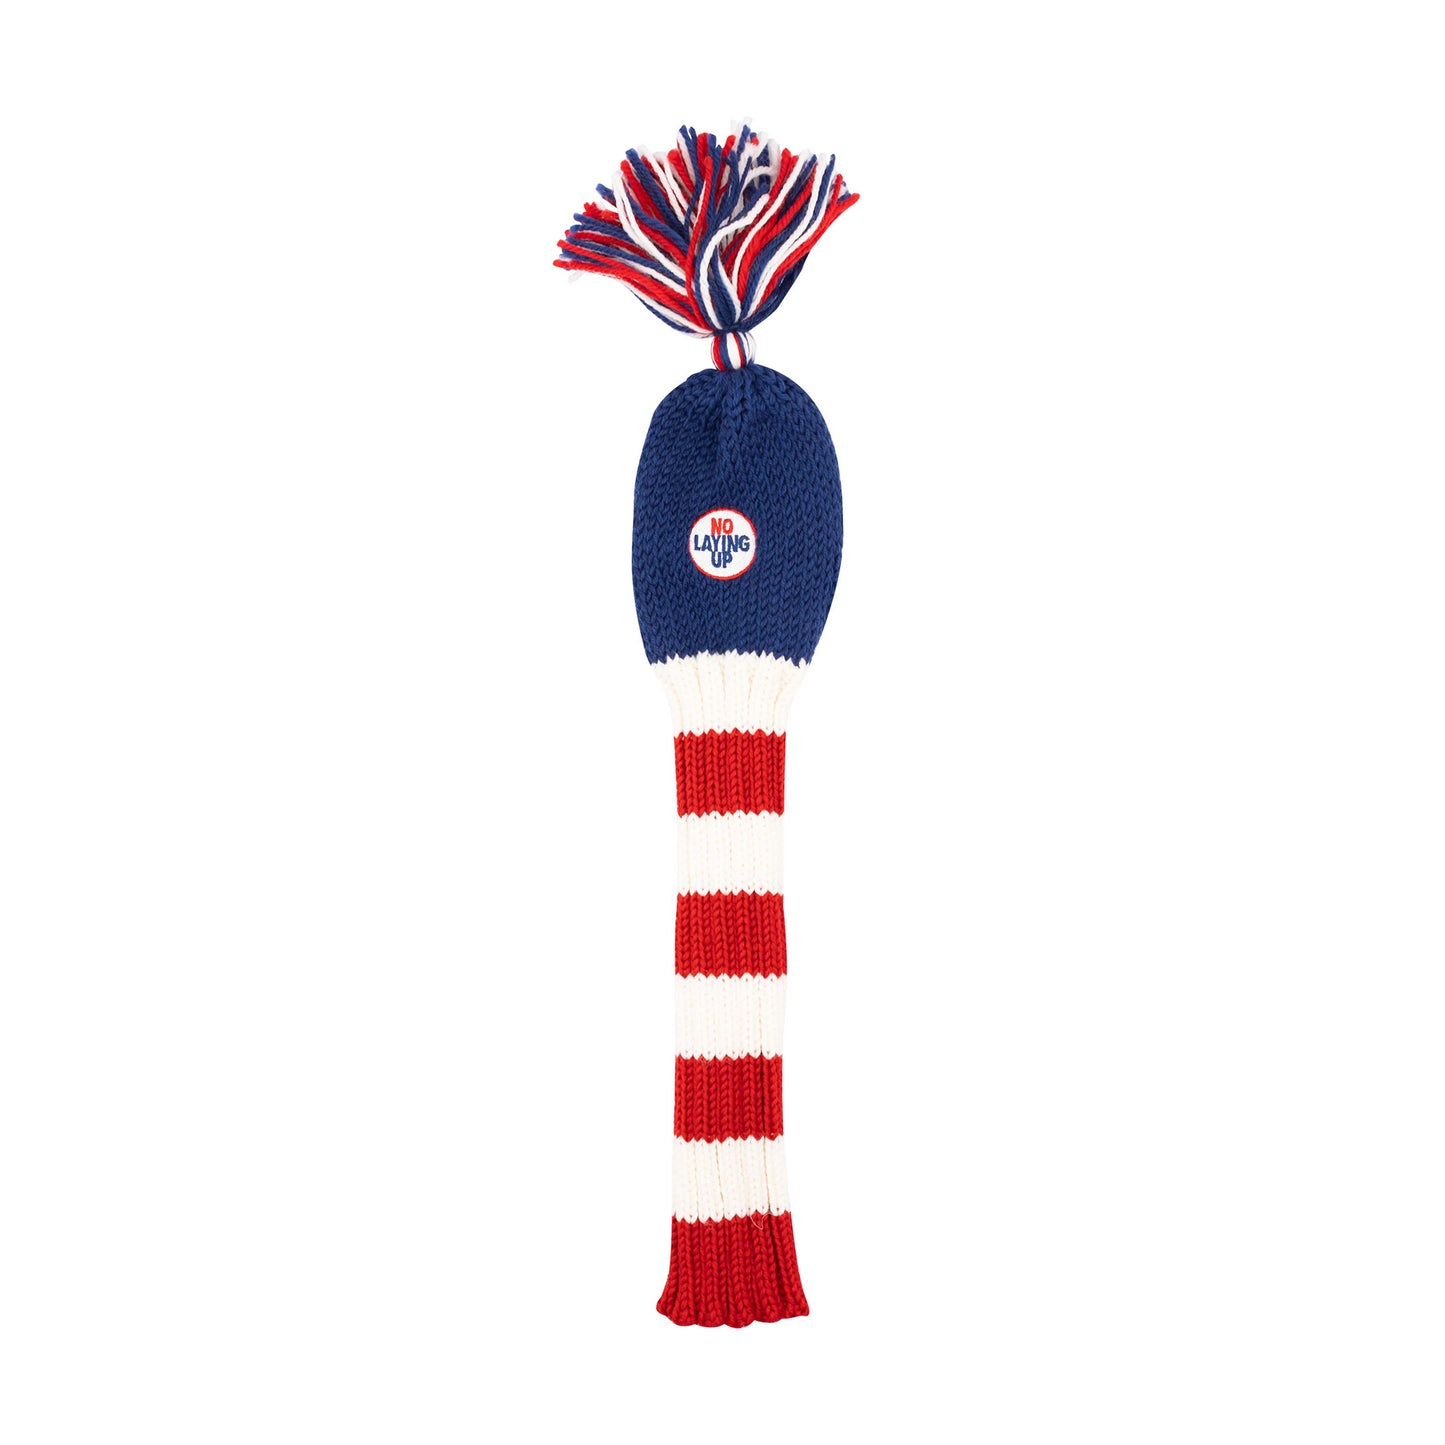 NLU x Fore Ewe Knit Driver Headcover | Red, White, and Blue